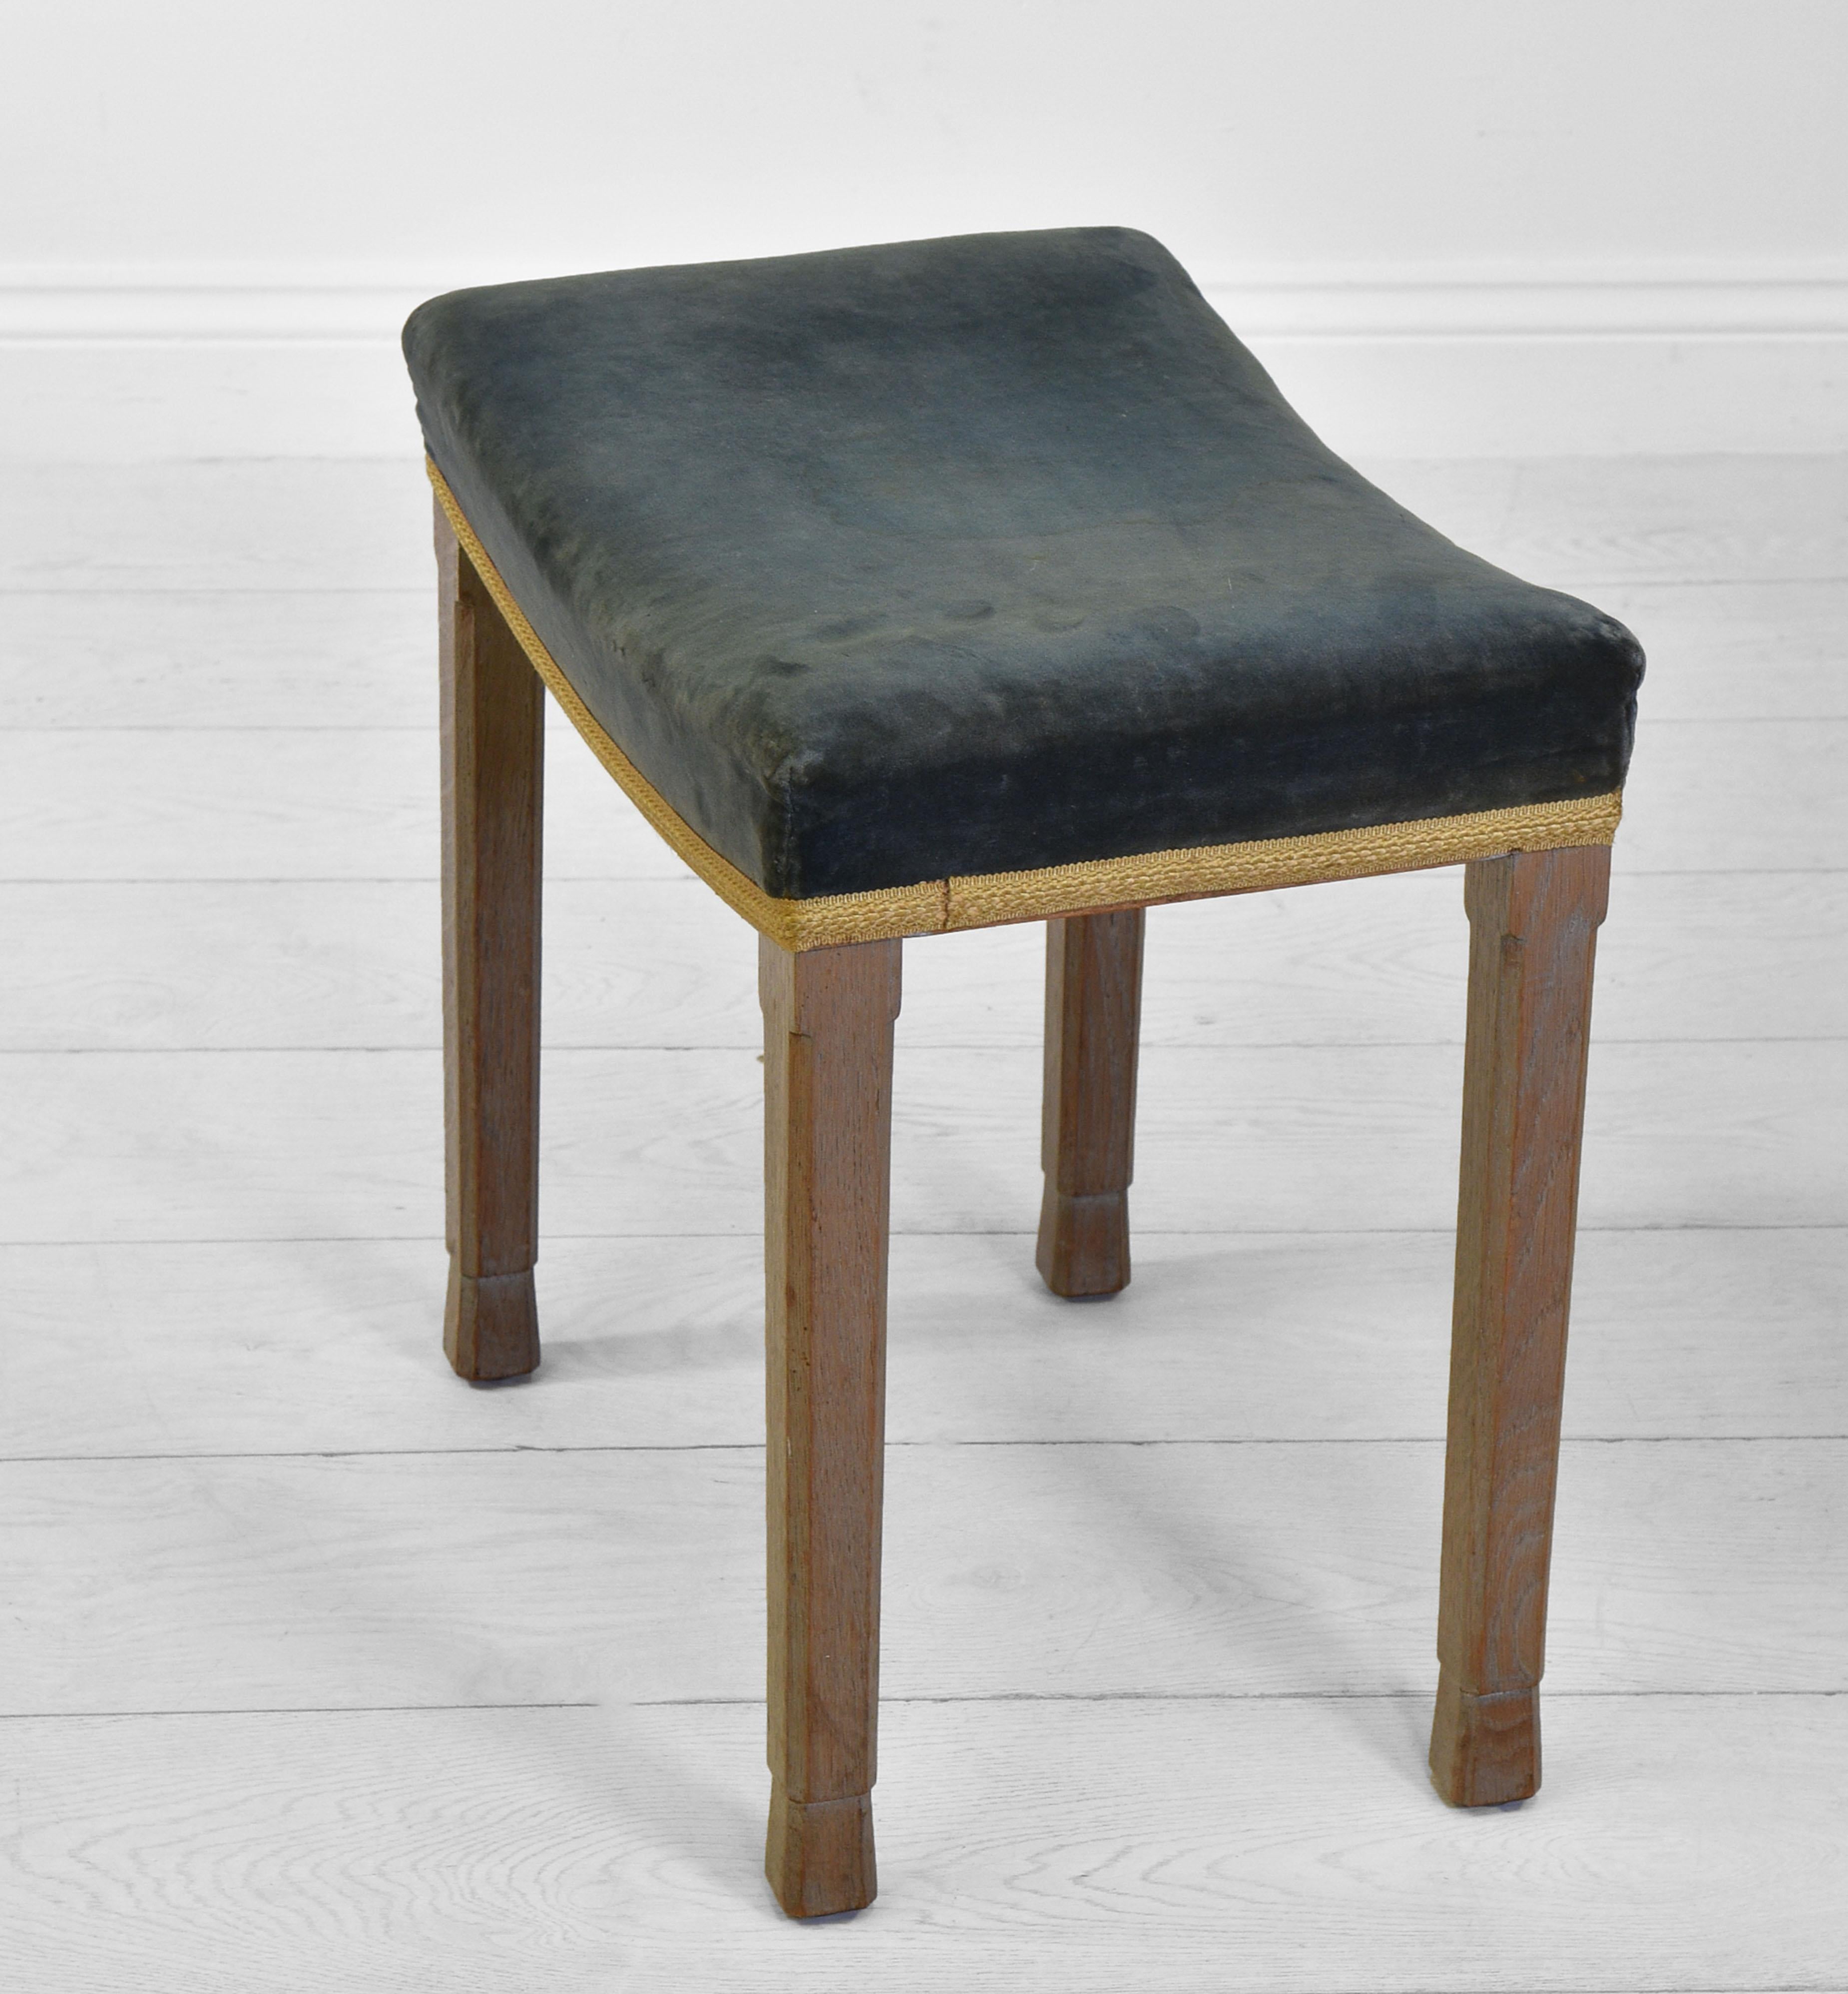 Original Queen Elizabeth II Coronation stool. 1953.

The stool has the Coronation stamp along with the furniture maker, The Thomas Glenister Company. Stamped: Glenister Maker Wycombe.

The stool is in original condition, with the silver washed